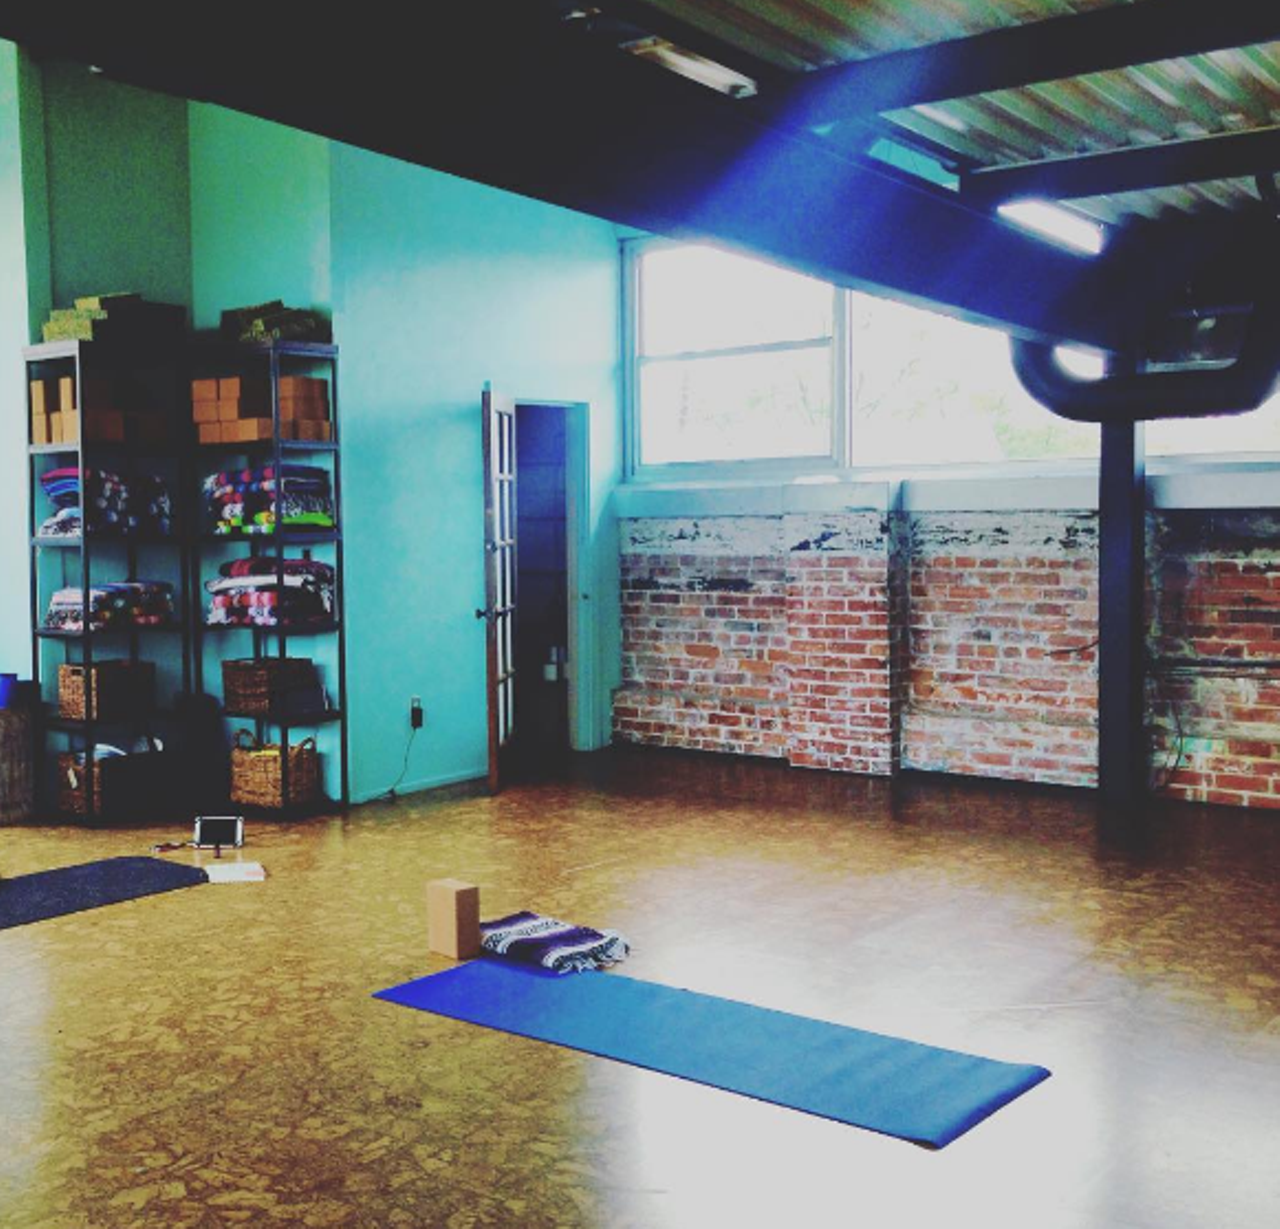 5 Points Local
1017 N Flores St, (210) 267-2652
Take a break with Yoga for Lunch or enjoy Your Brain on Yoga &#151; 5 Points Local has several classes to choose from with varying difficulties and styles.
Photo via Instagram/hannah_hartman5